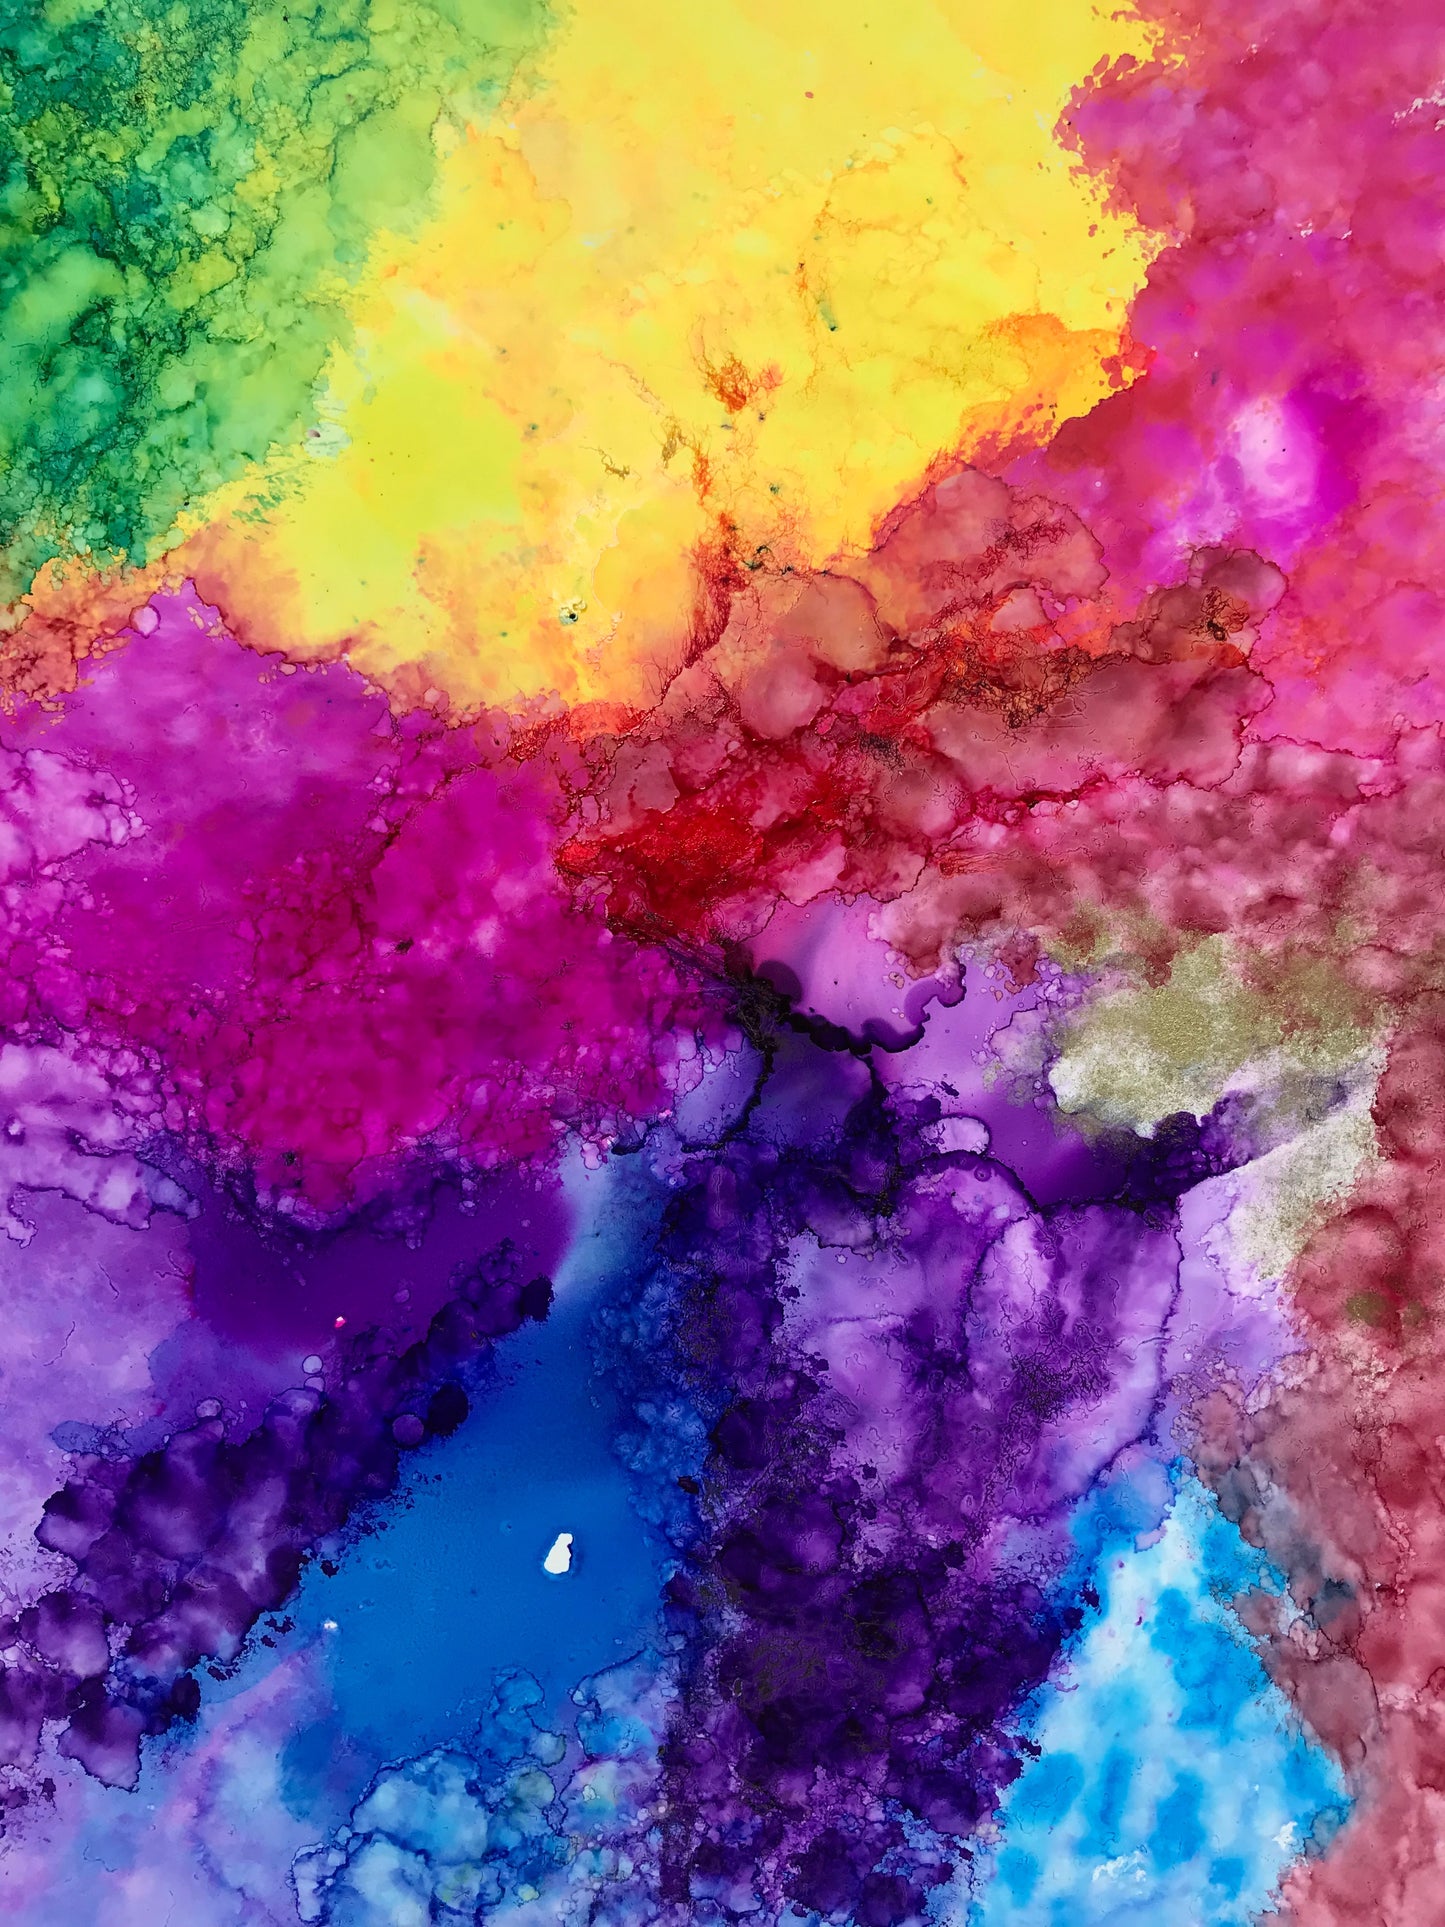 Sun, Feb 7, 11a-1p "Alcohol Inks on Tile" Private Houston (VIRTUAL) Kids Painting Party